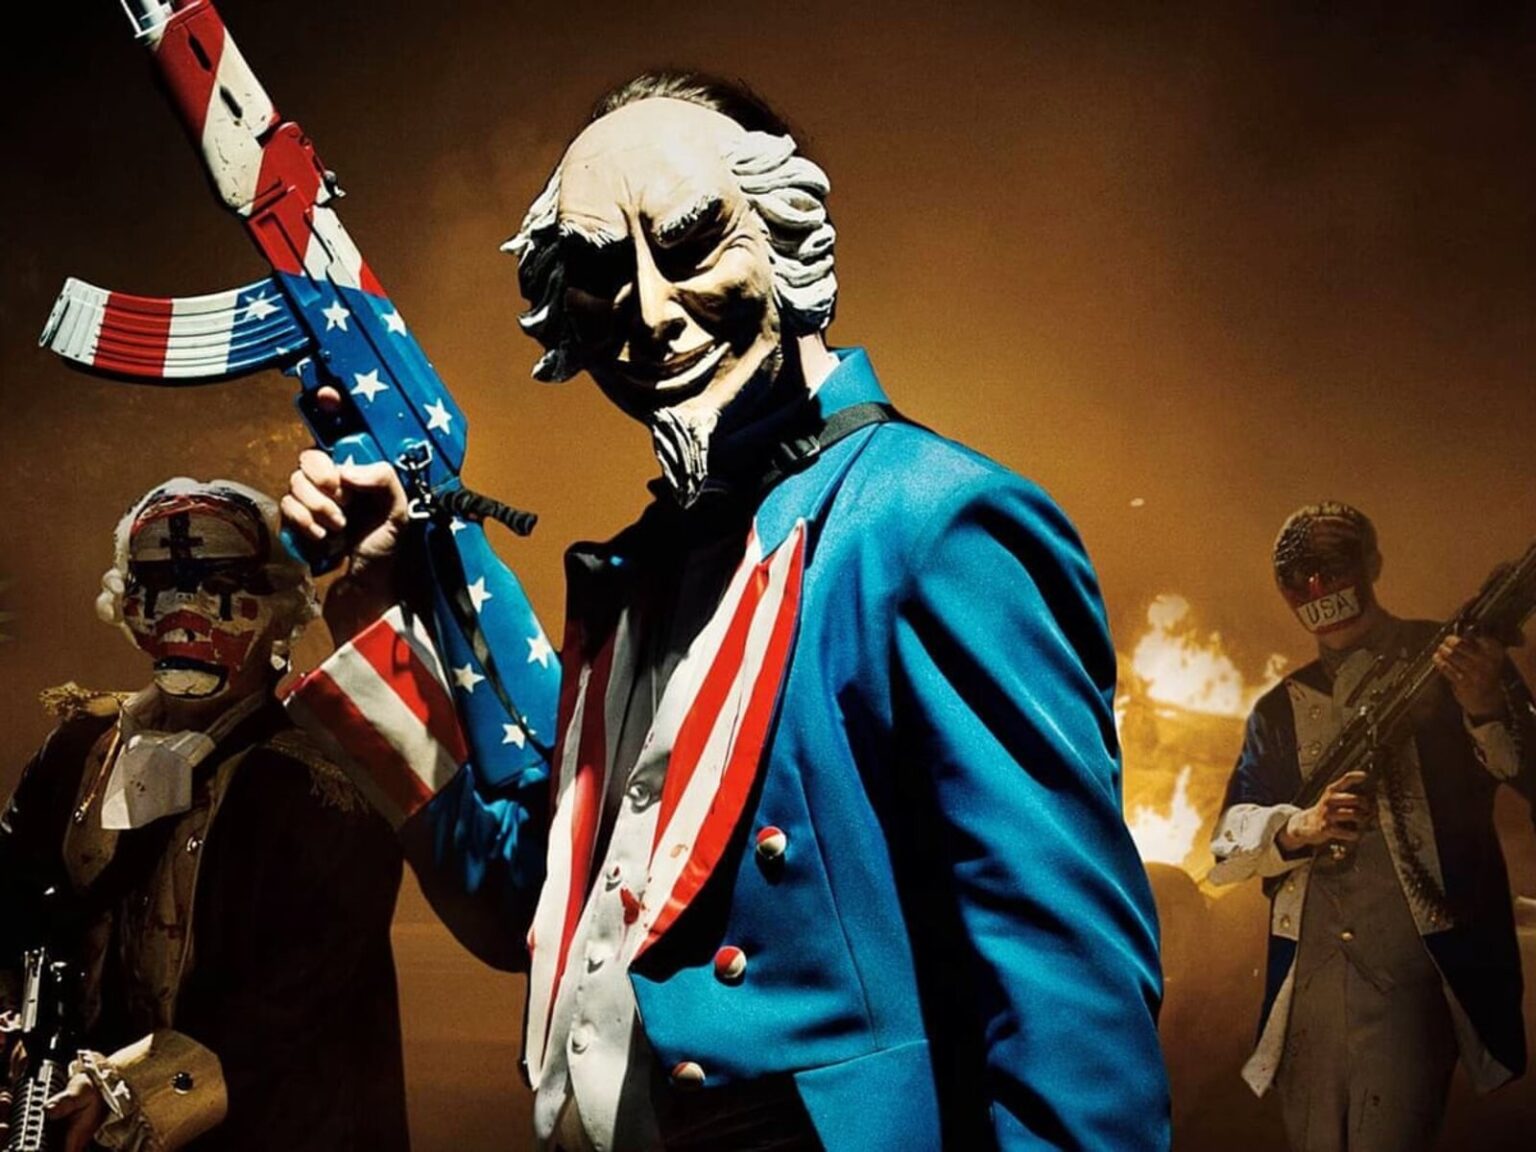 Is 'The Purge' real? Prepare yourself for how it can actually happen